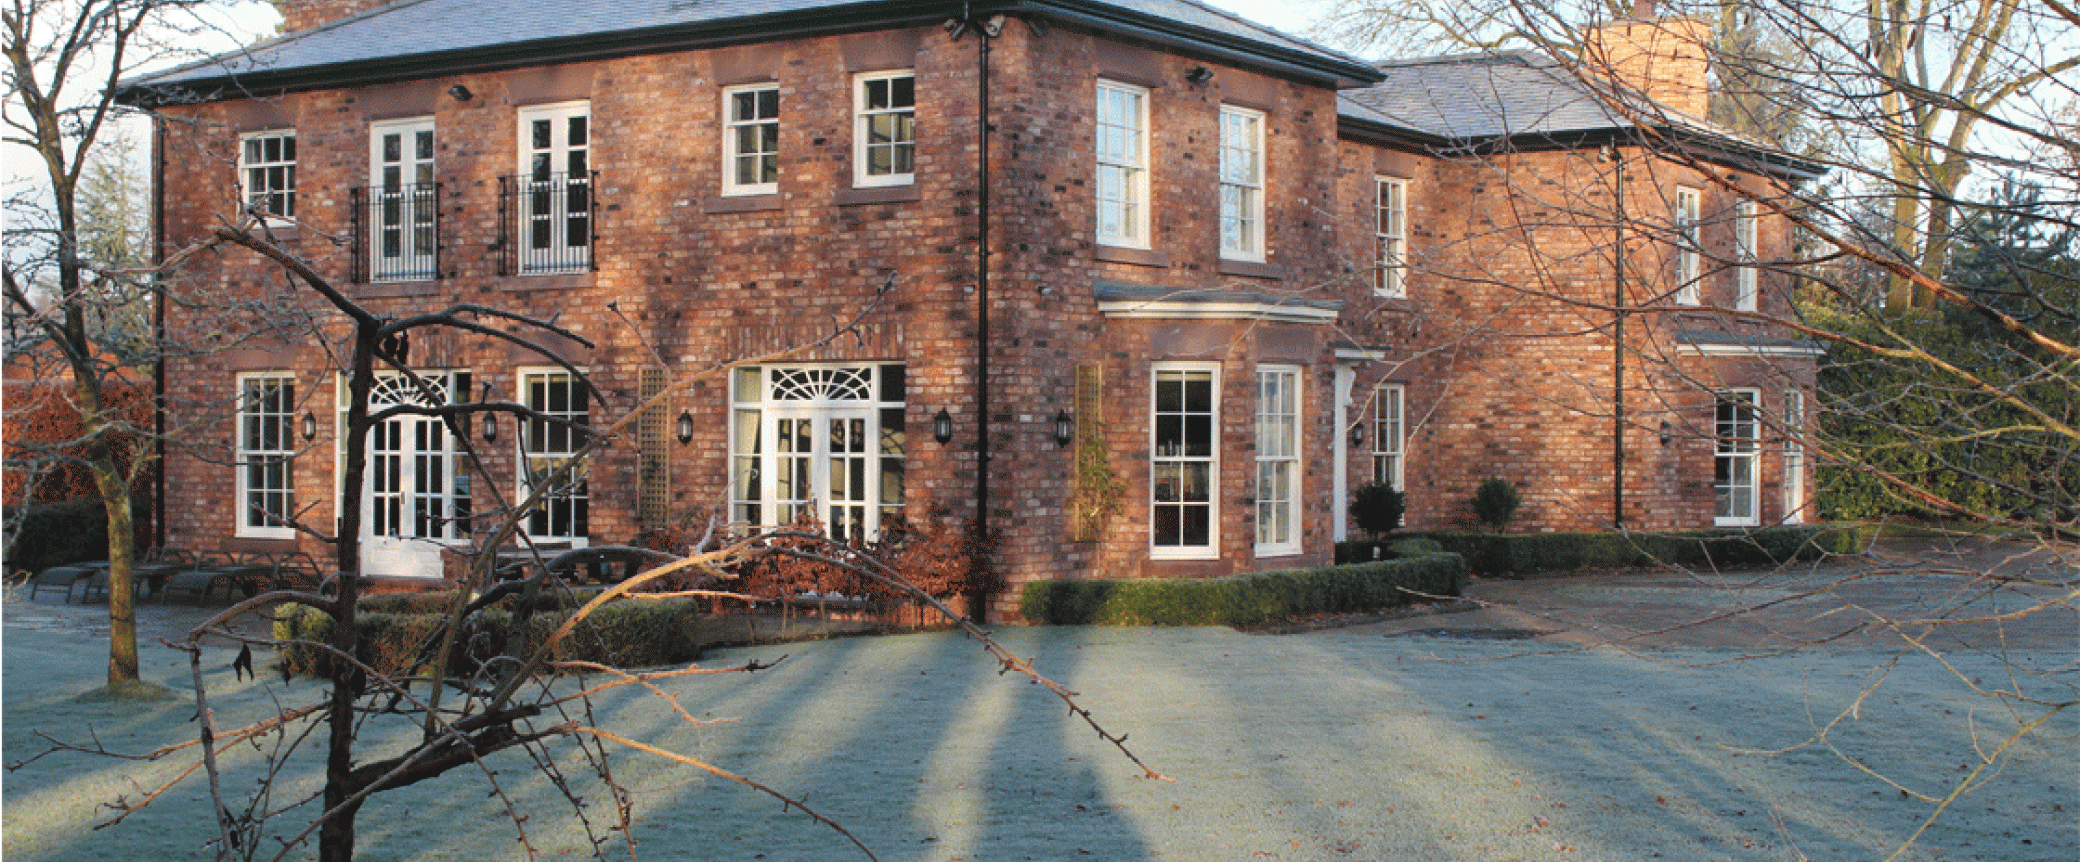 Georgian Period Style Replacement Dwelling Chelford Cheshire